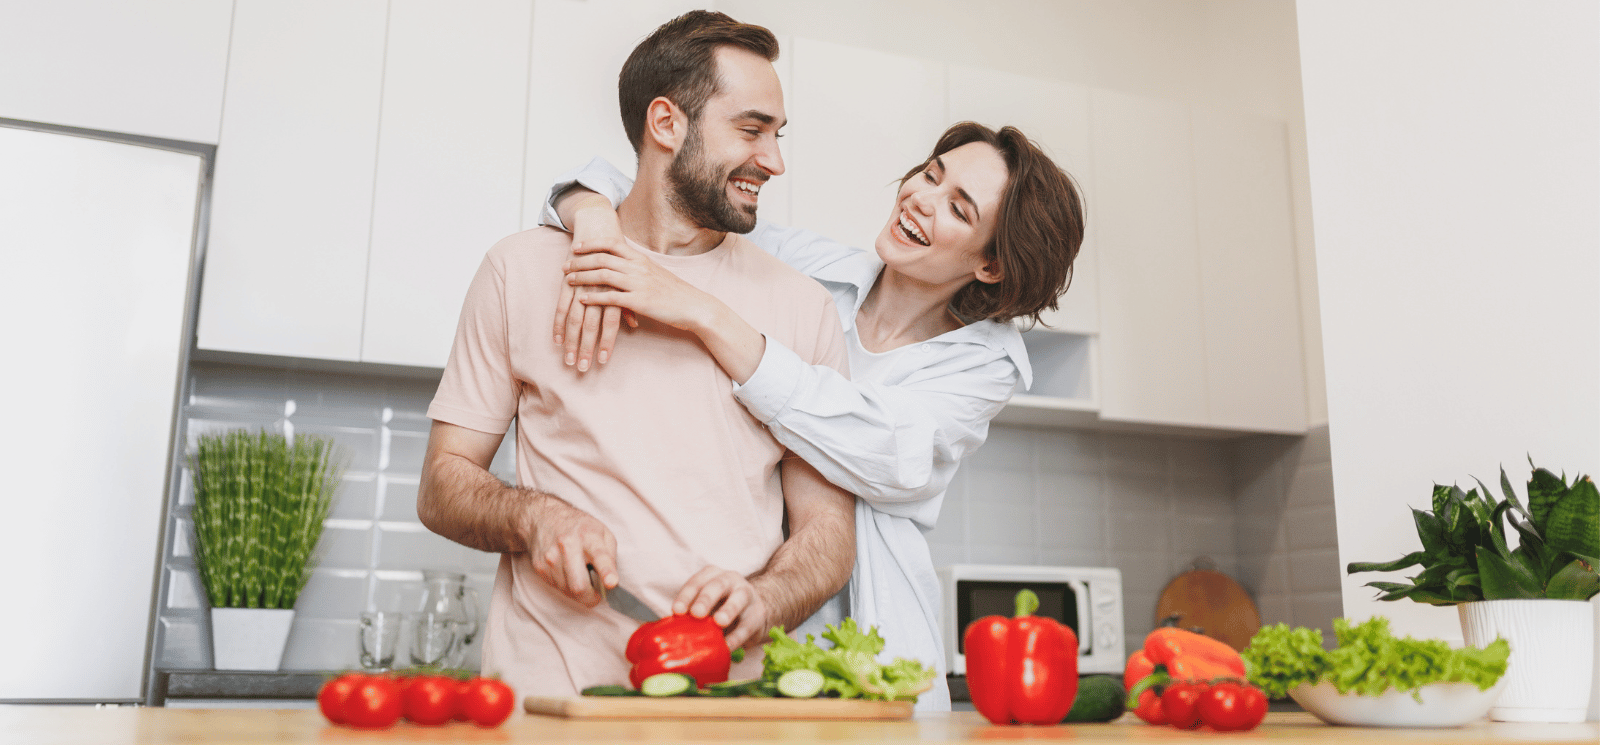 Smiling couple standing in kitchen.